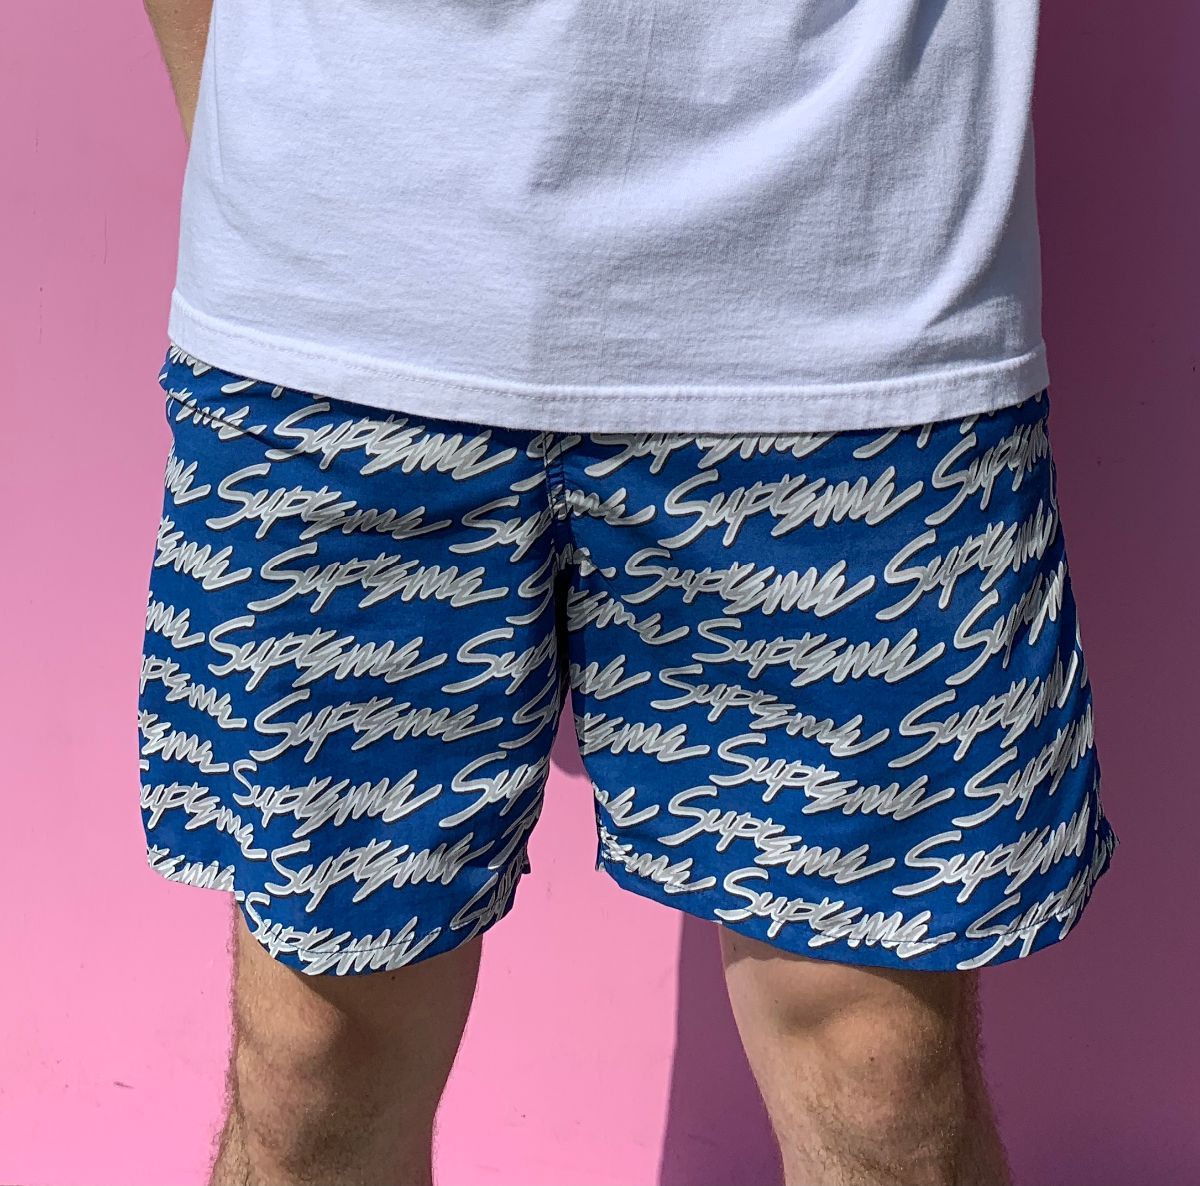 SUPREME SIGNATURE SCRIPT LOGO WATER BOARD SHORTS ALL OVER TEXT WITH  DRAWSTRING WAIST ZIP BACK POCKET AND MESH LINING